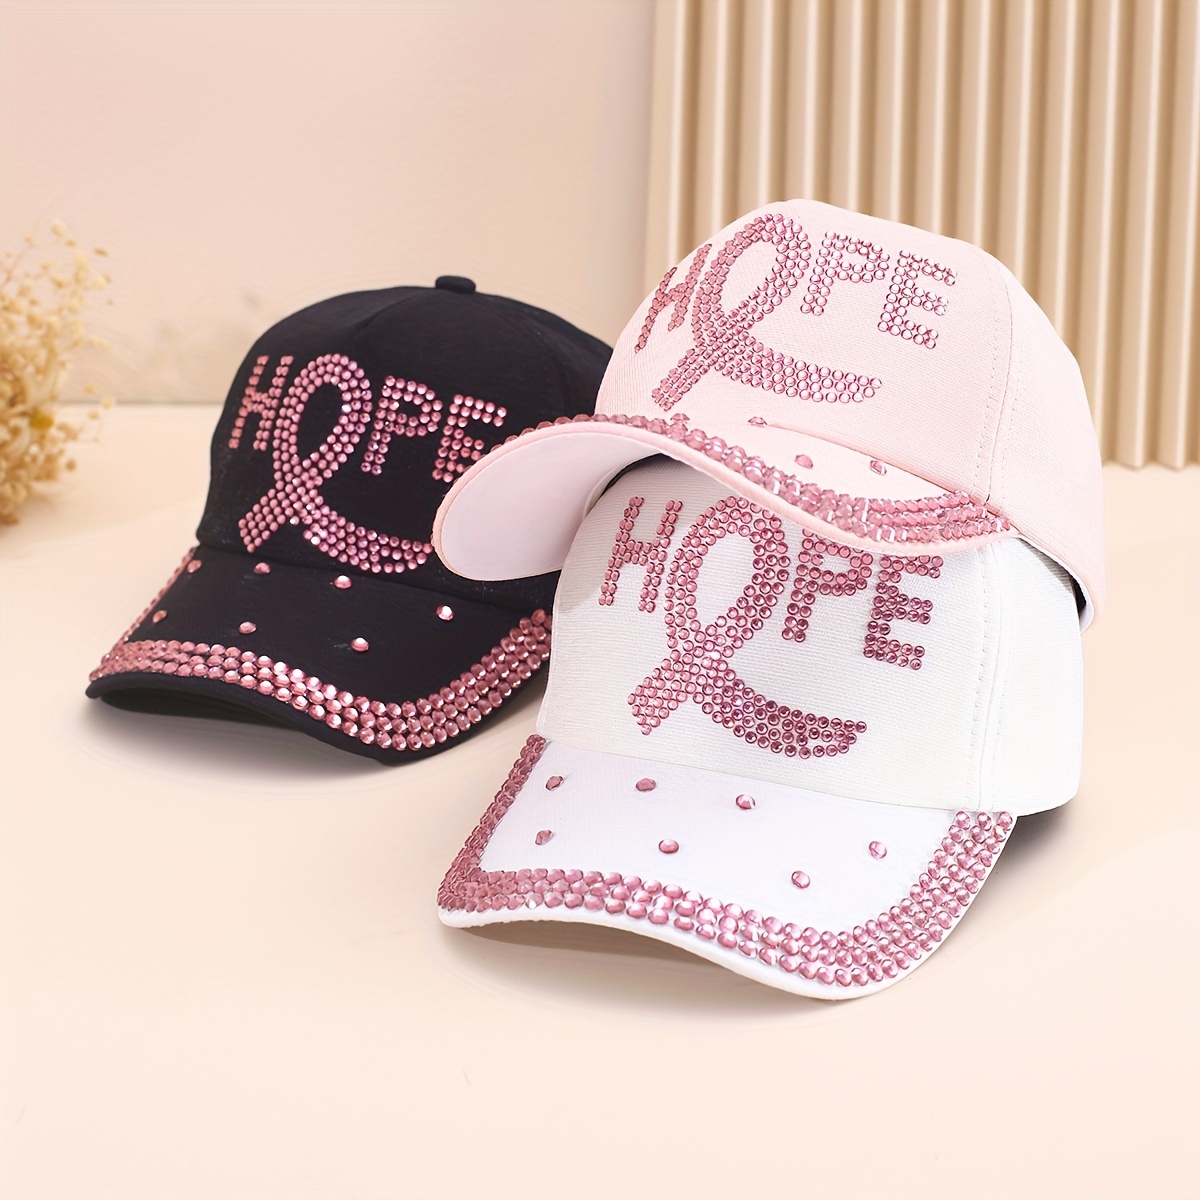 

Chic Pink Rhinestone Baseball Cap For Women - Adjustable, Lightweight Cotton Dad Hat With Breast Cancer Awareness Design